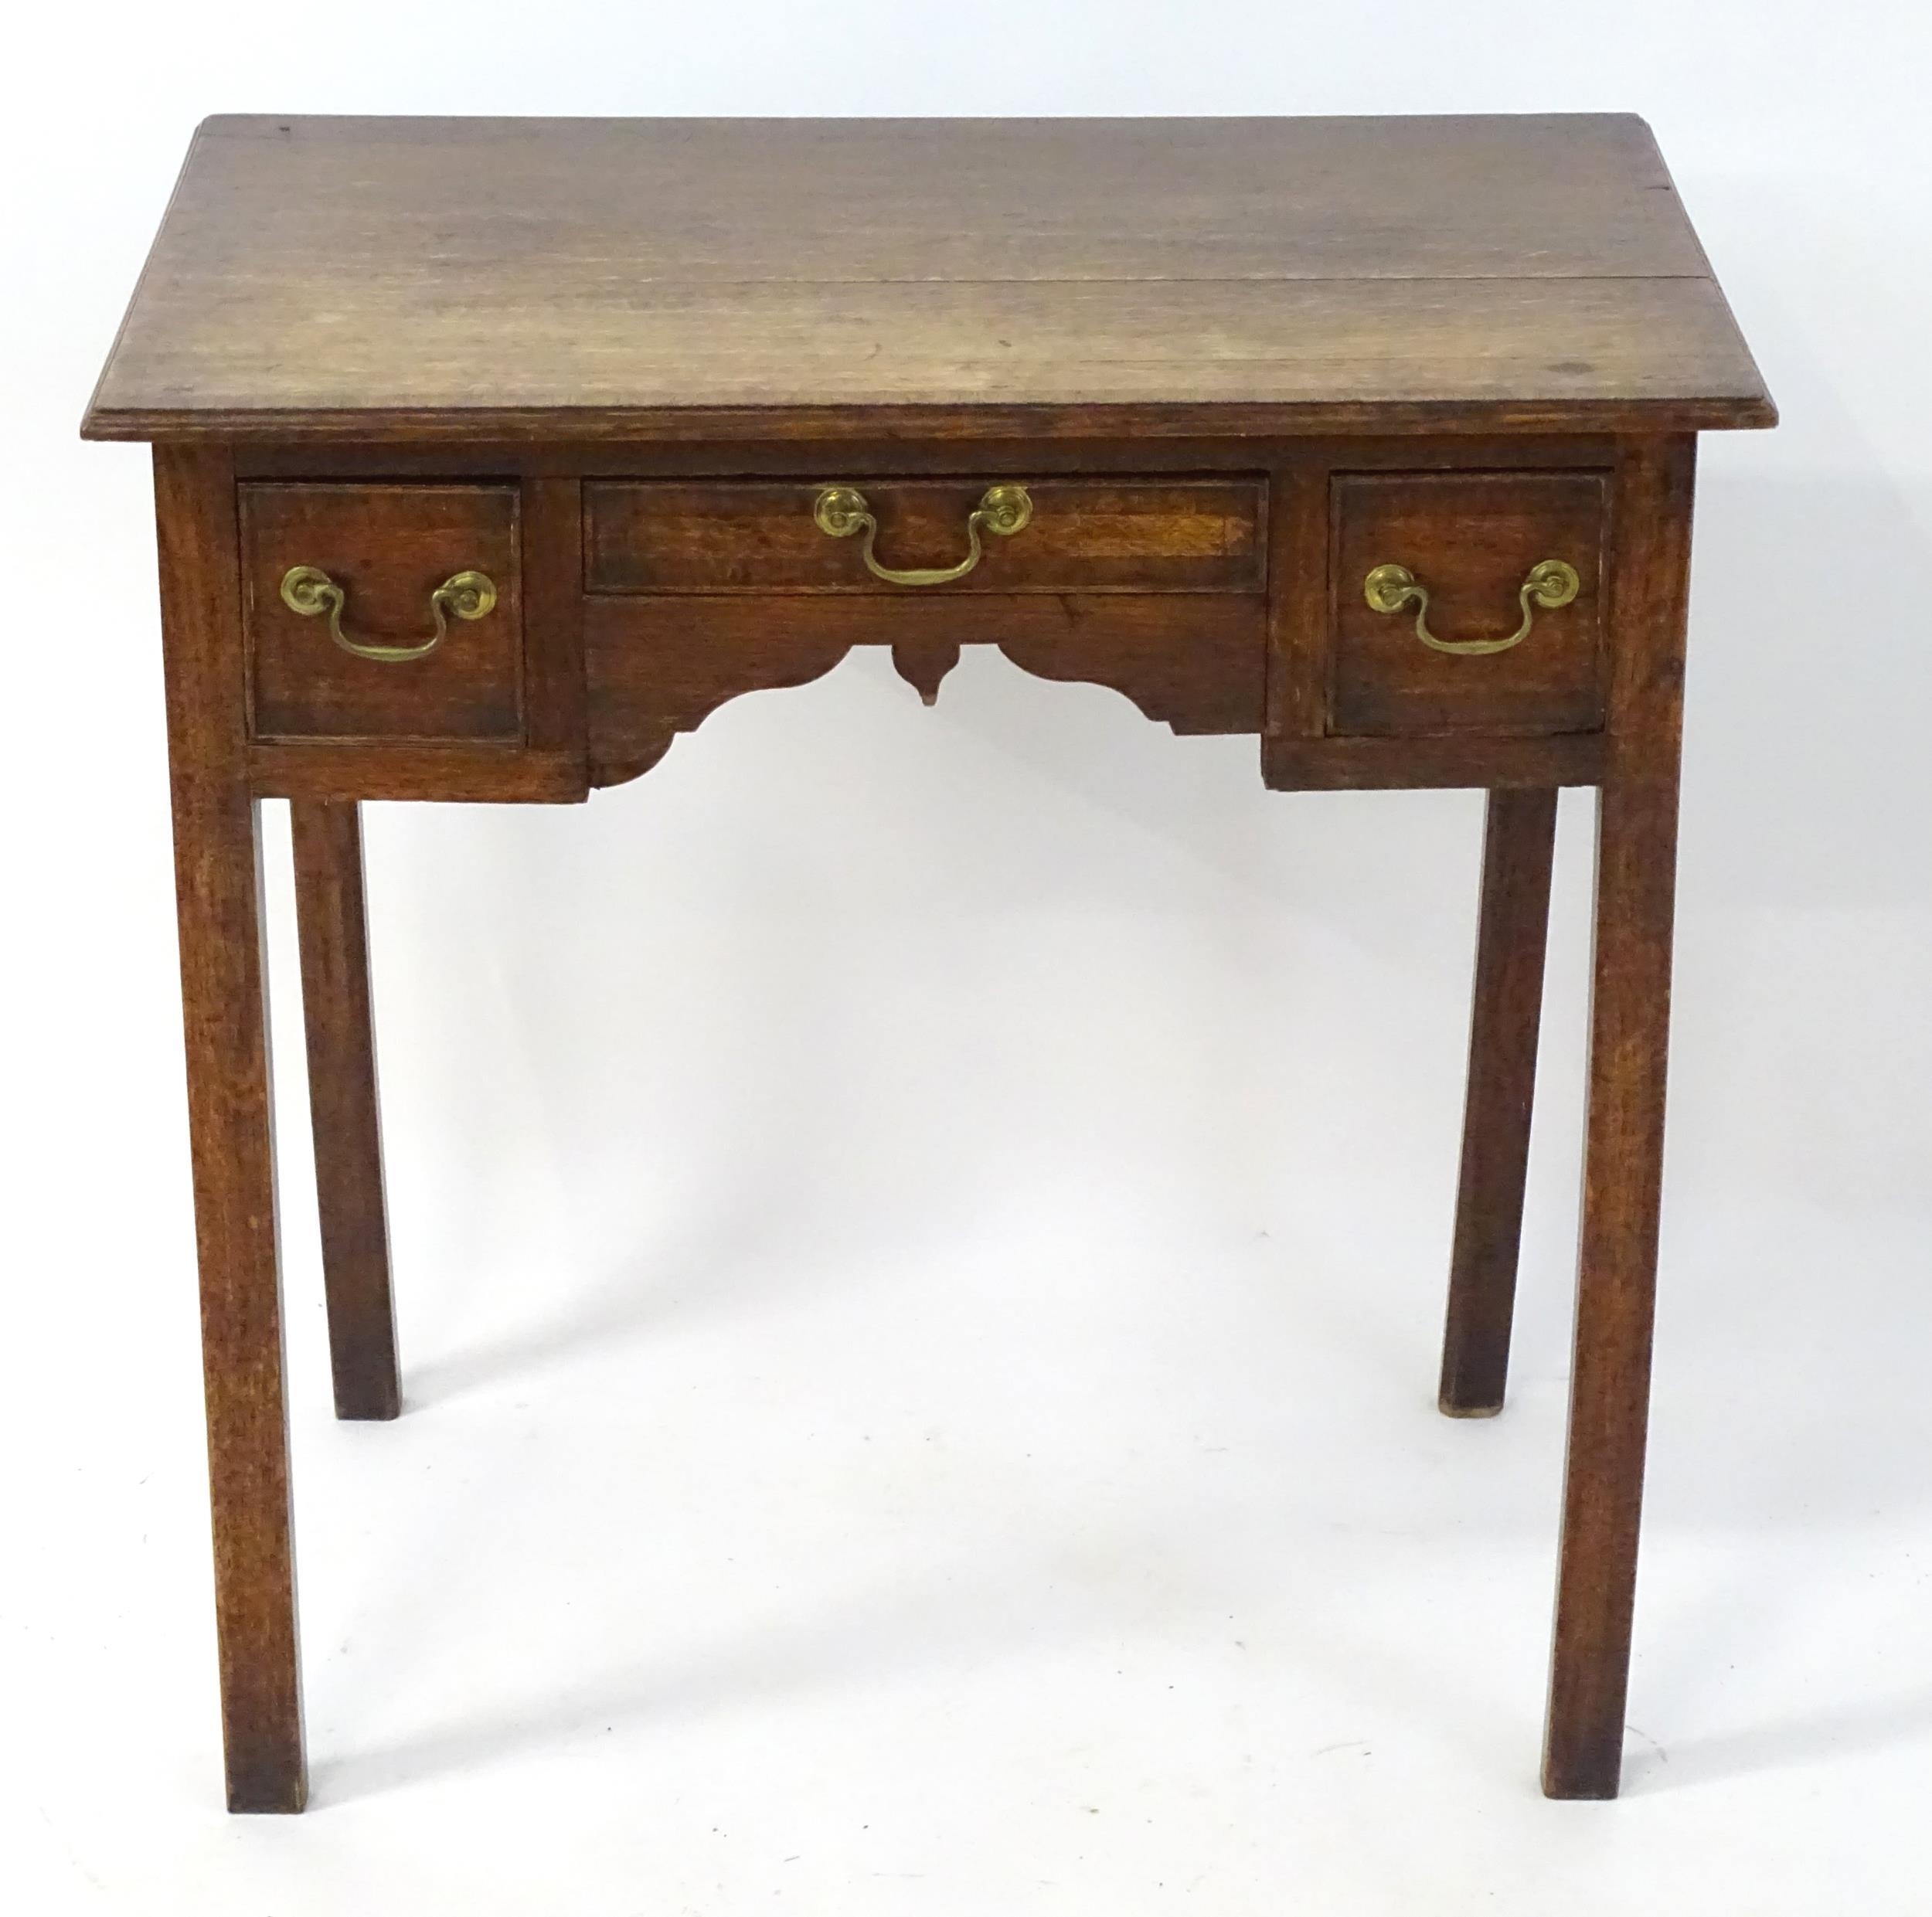 An early 19thC oak lowboy with crossbanded decoration, a rectangular moulded top above three short